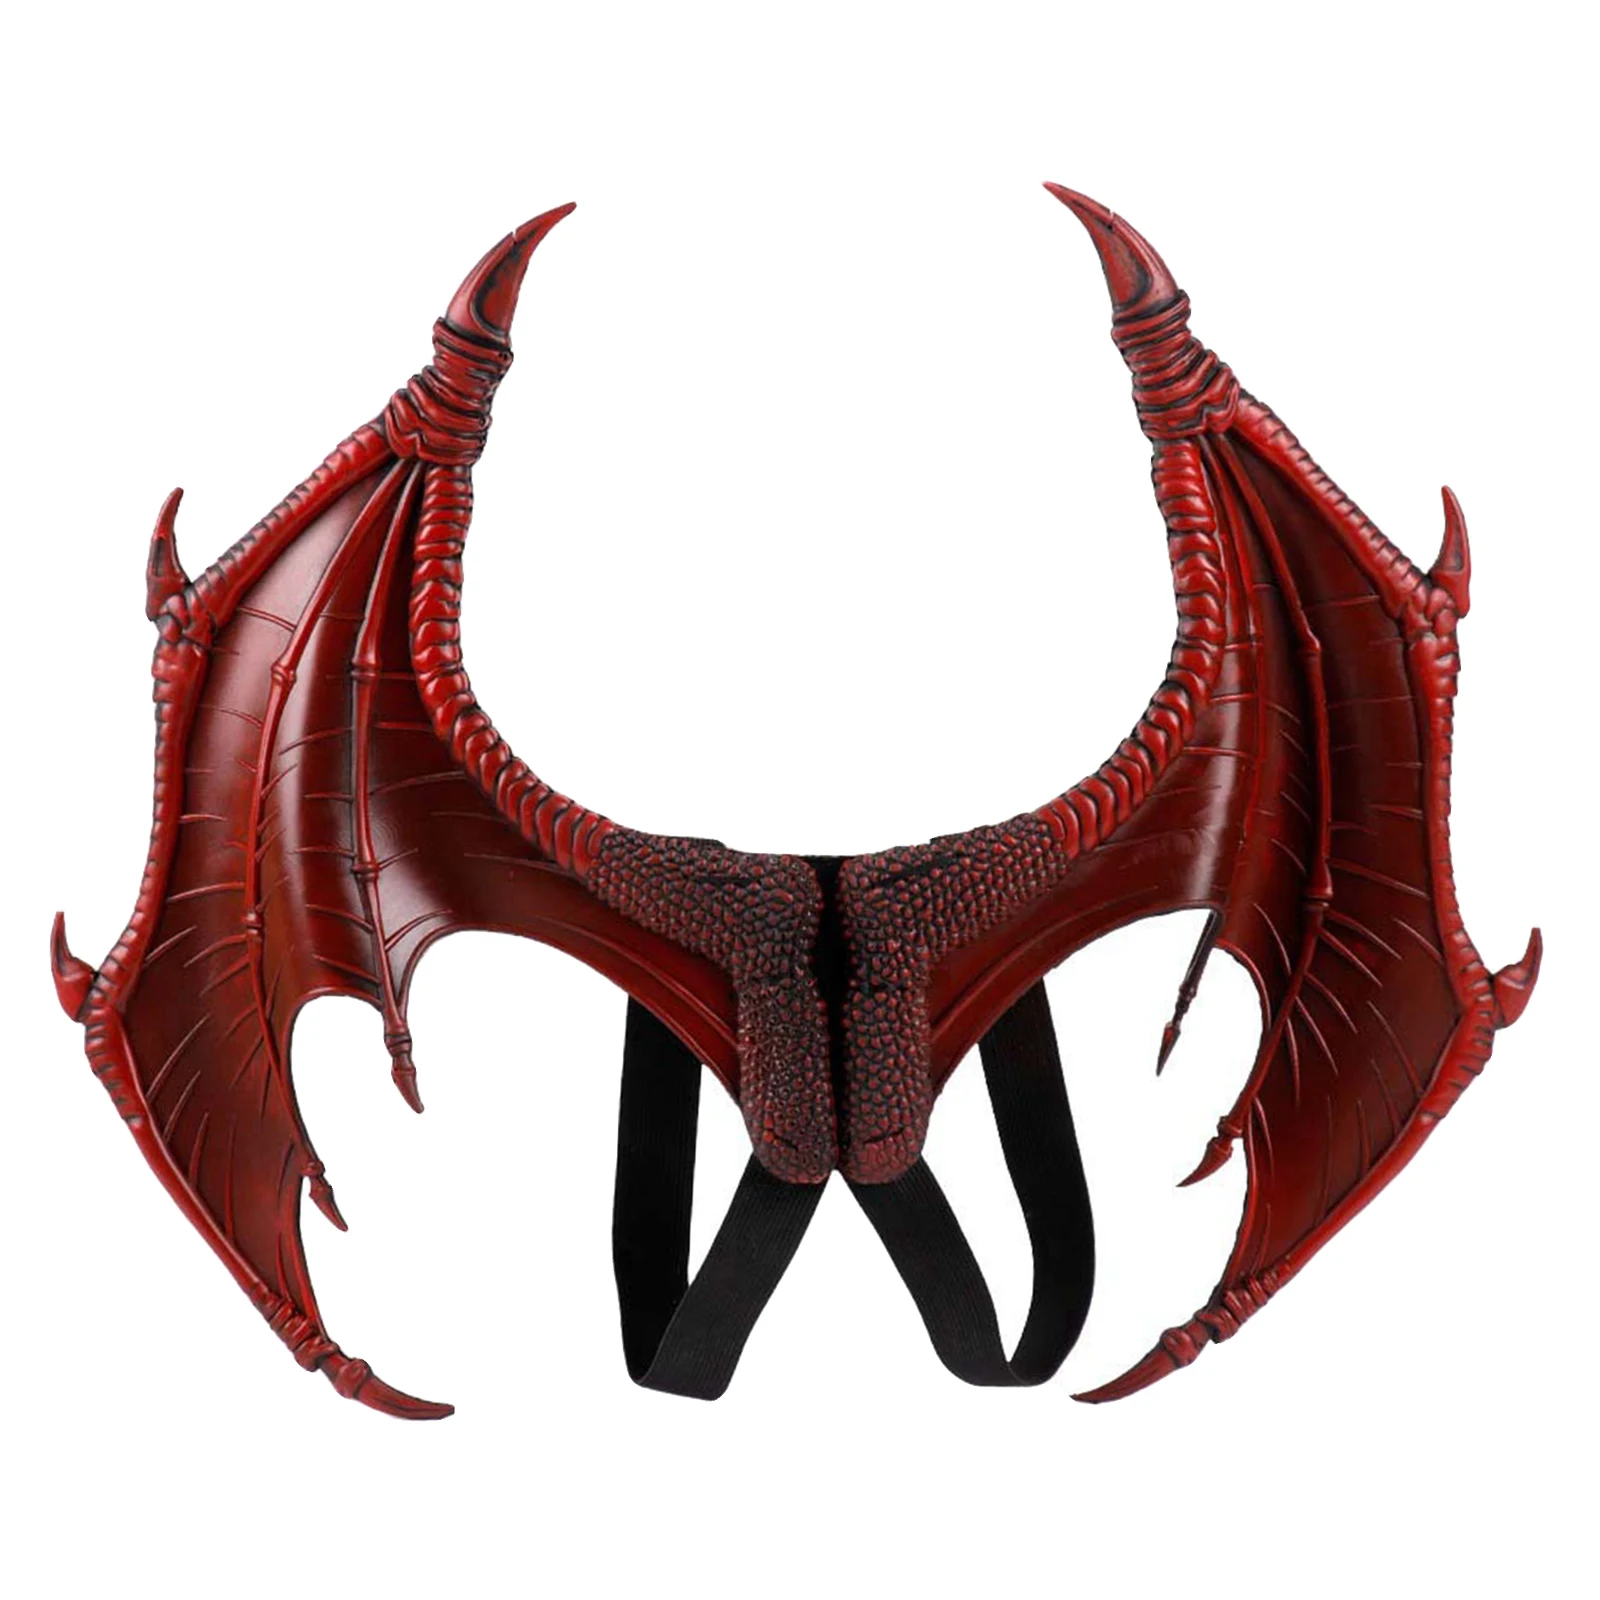 Halloween Dragon Wing Christmas Accessory Scary Devil Costume Fancy Dress Party Dinosaur Wing for Adult Kids